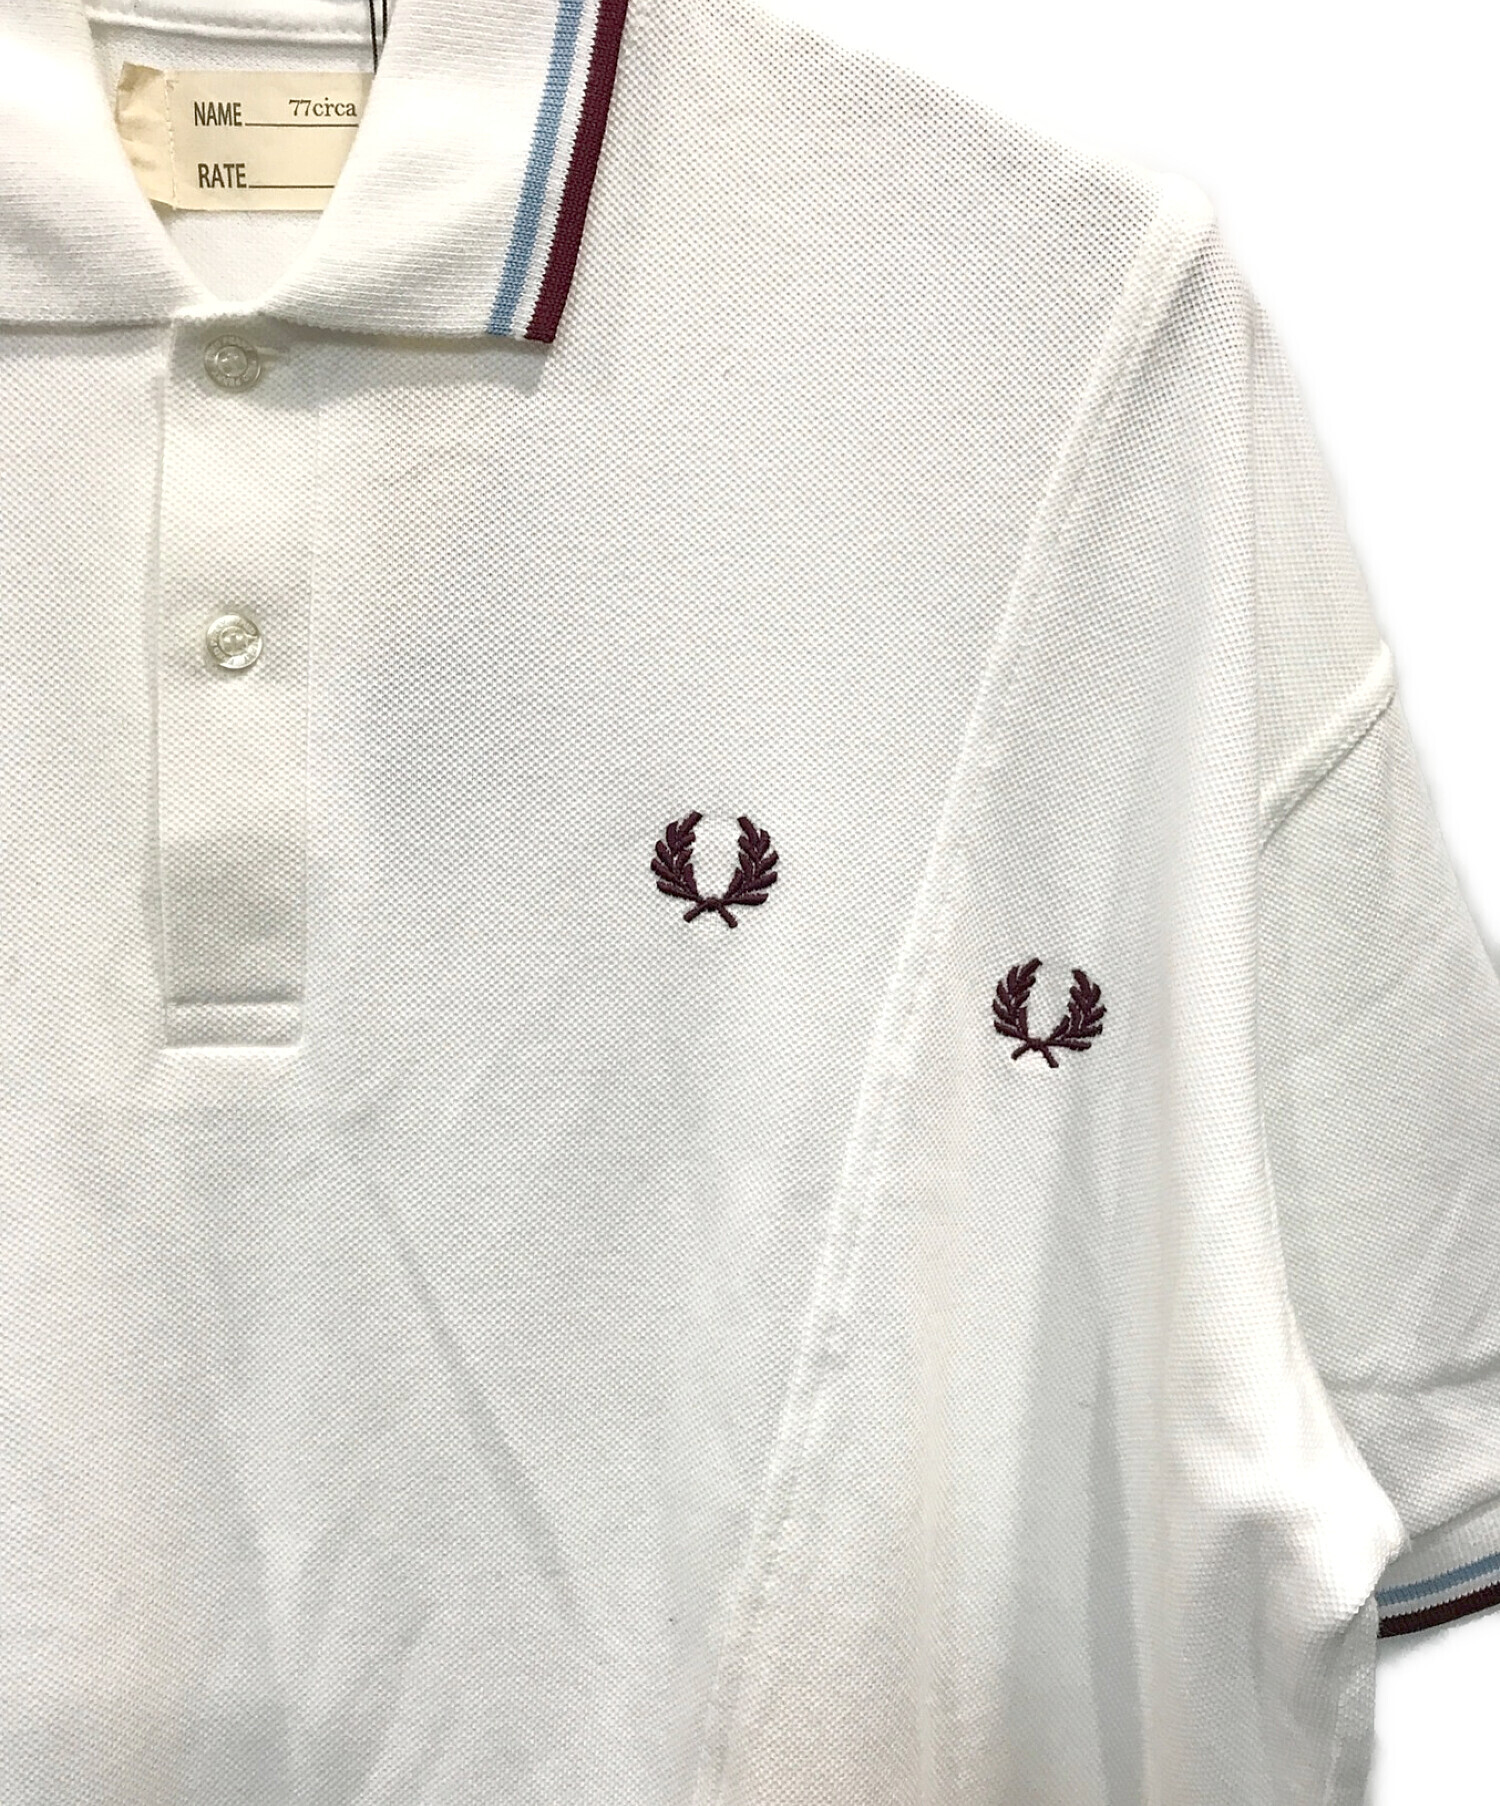 FRED PERRY × 77circa ポロシャツ